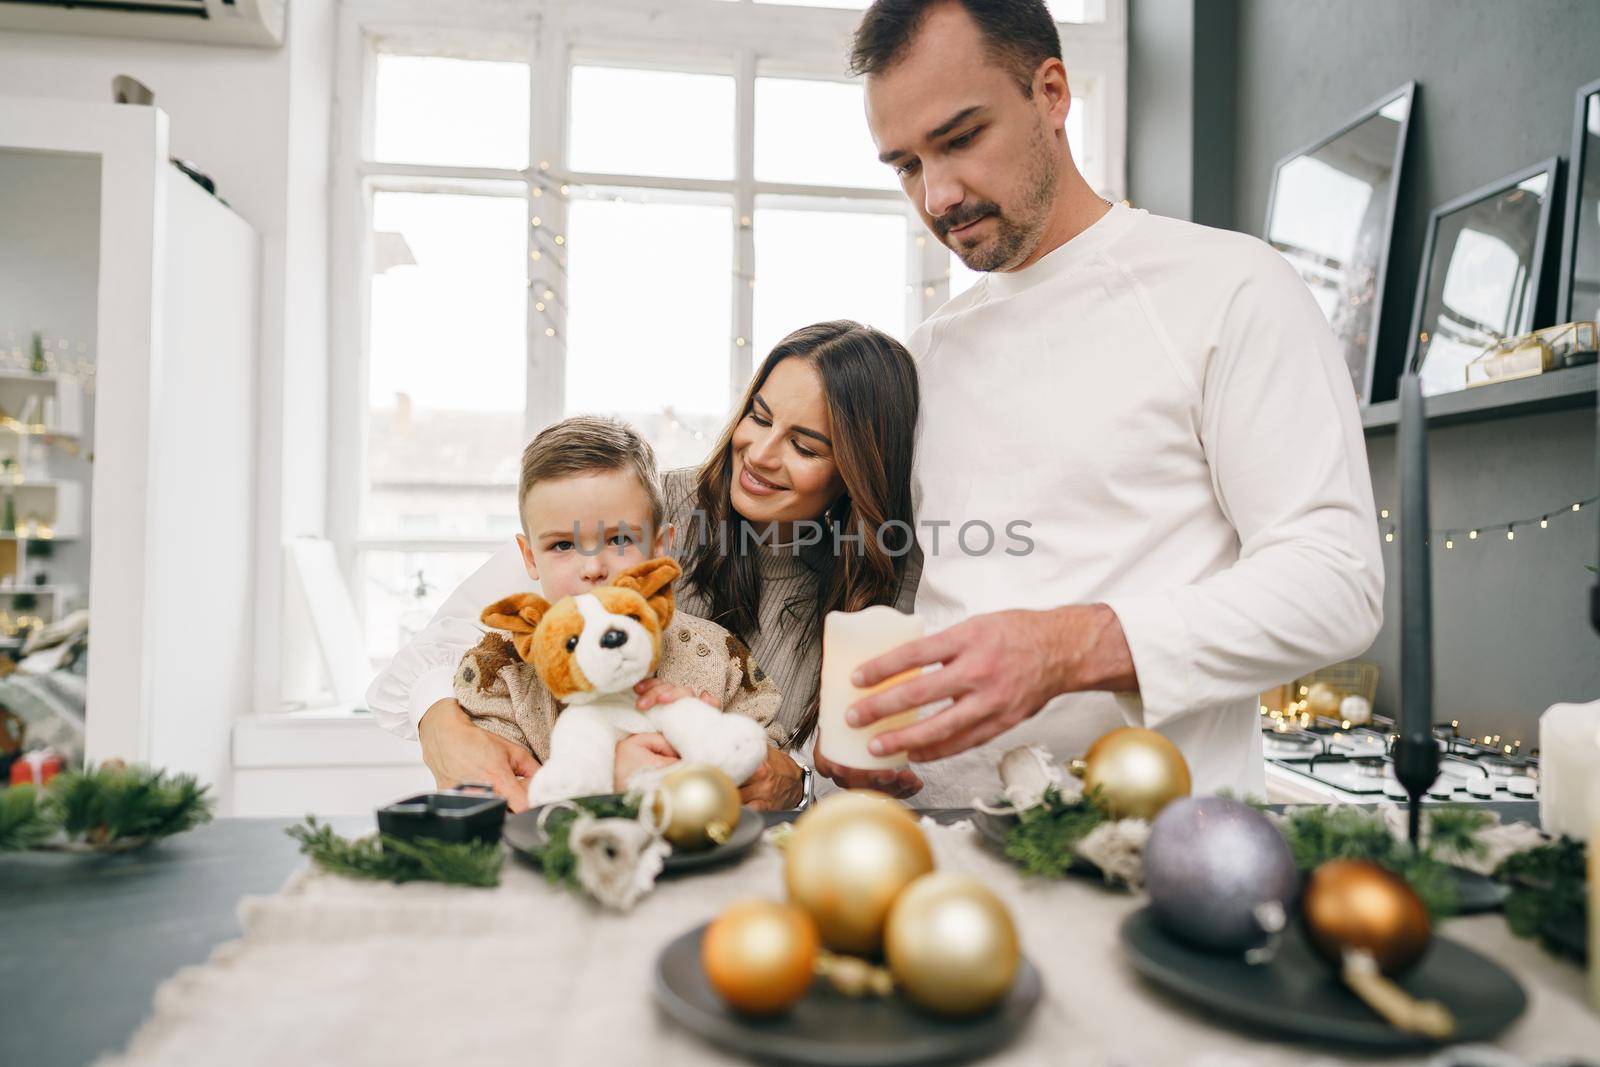 A portrait of happy family in the kitchen decorated for Christmas holidays